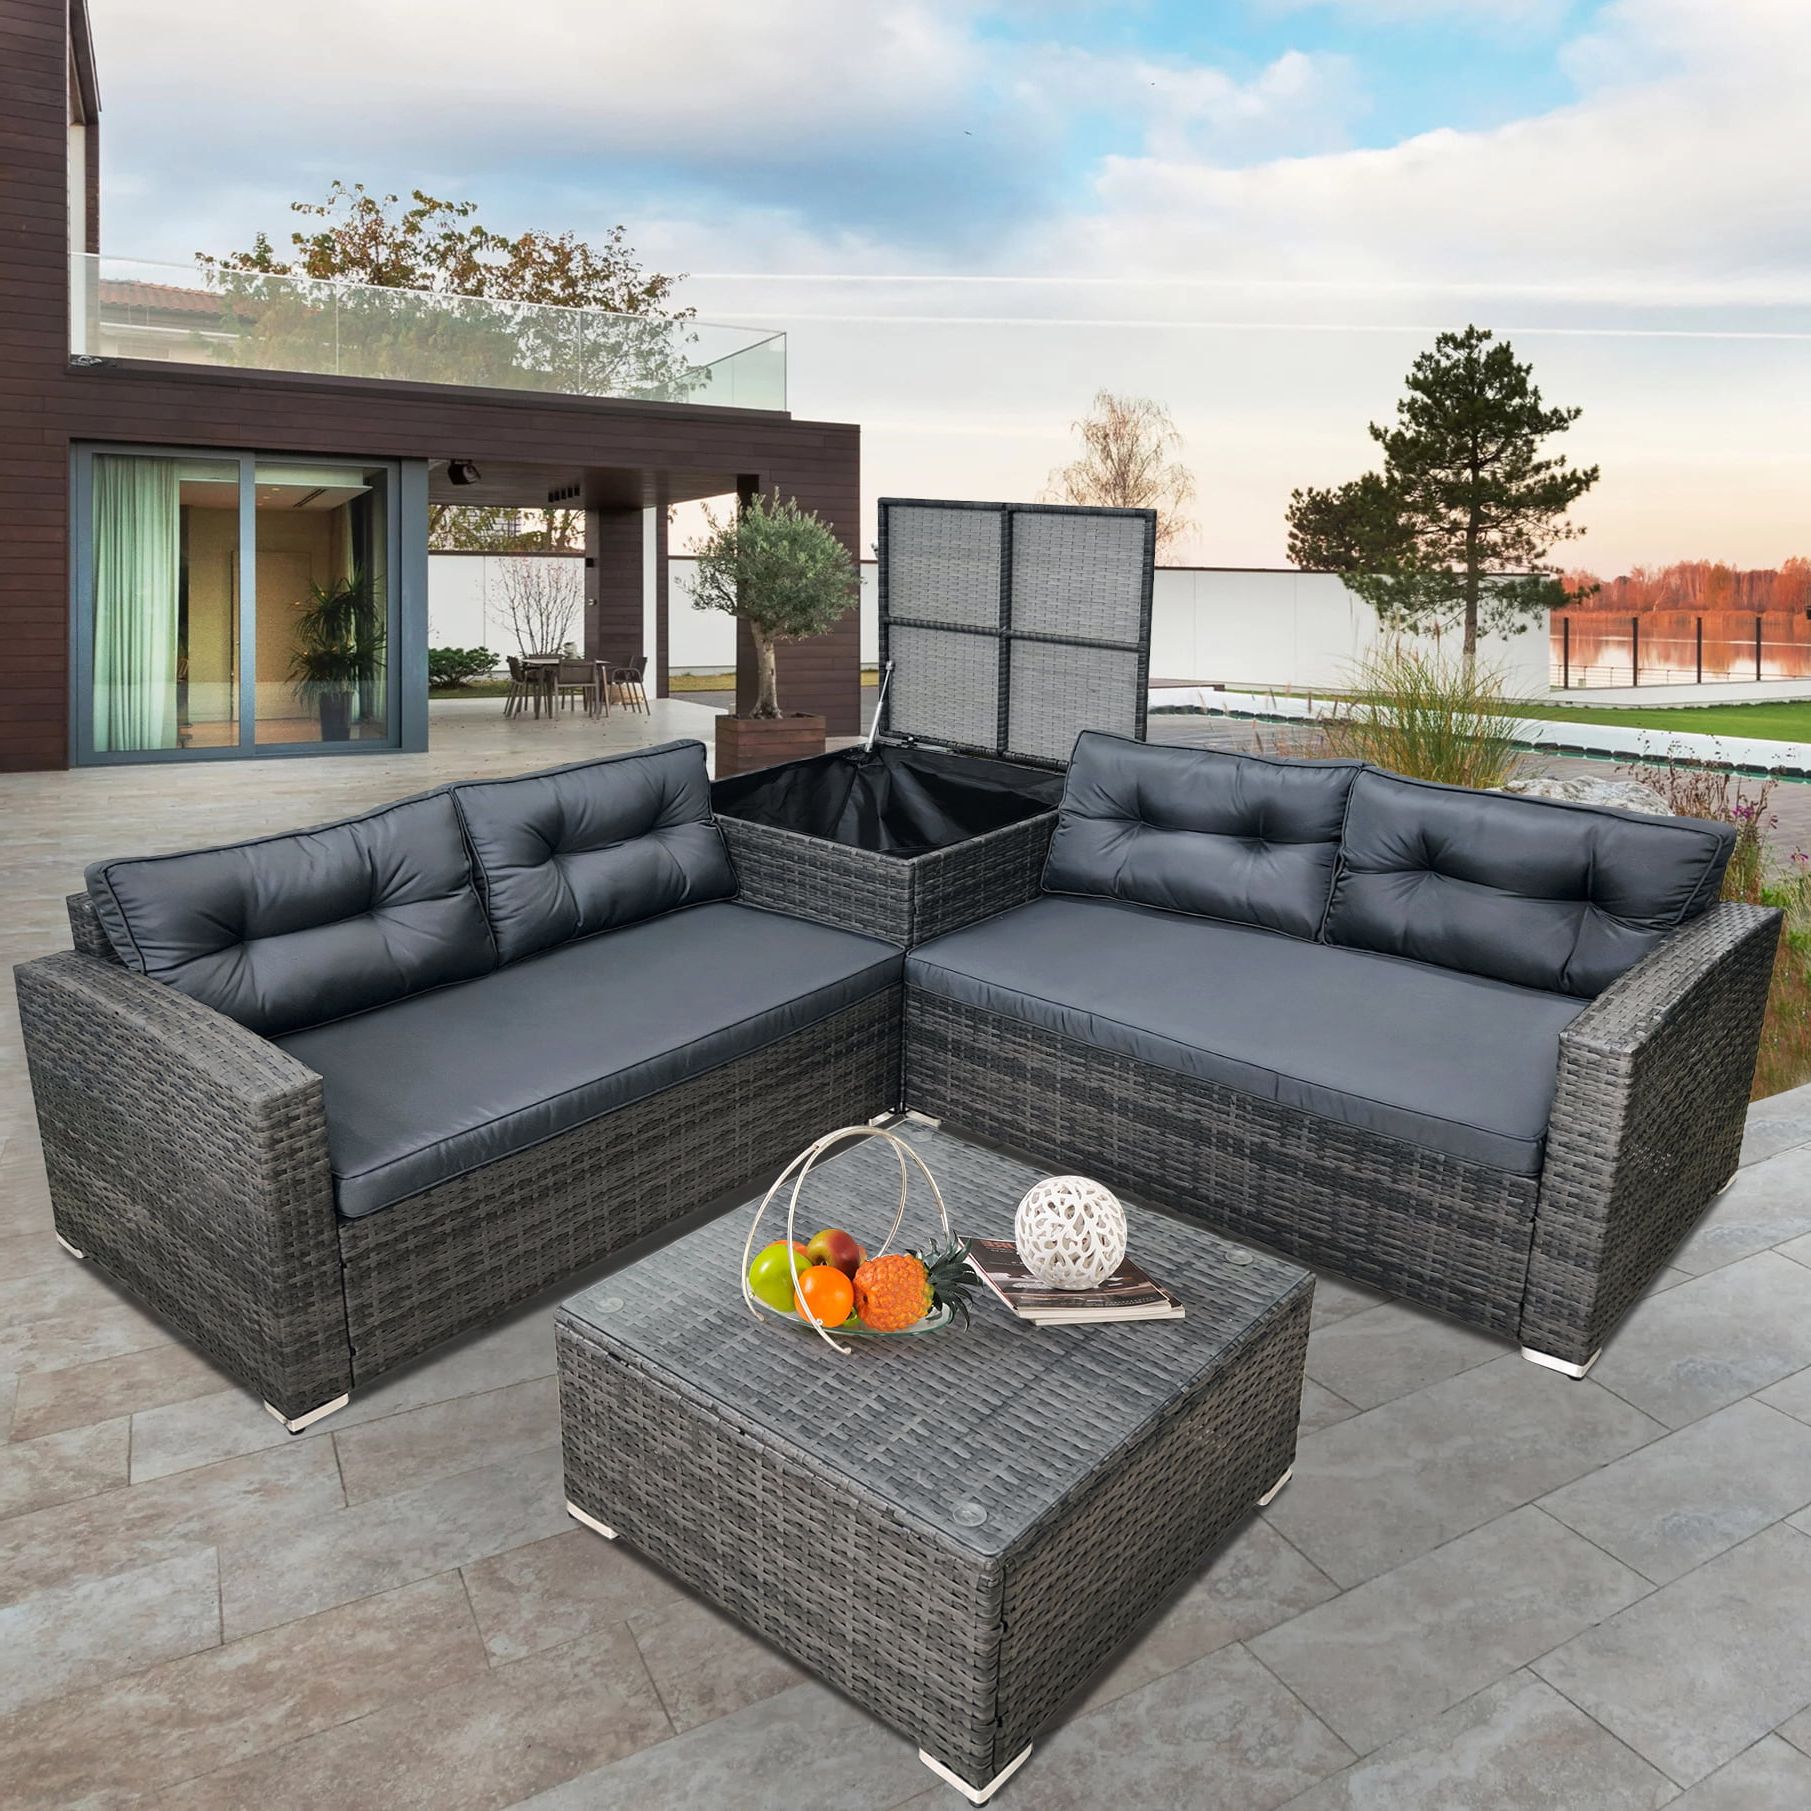 Famous Rattan Wicker Patio Furniture, 4 Piece Outdoor Conversation Set With Storage  Ottoman, All Weather Sectional Sofa Set With Gray Cushions And Table For  Backyard, Porch, Garden, Poolside,l4537 – Walmart Regarding Storage Table For Backyard, Garden, Porch (View 9 of 15)